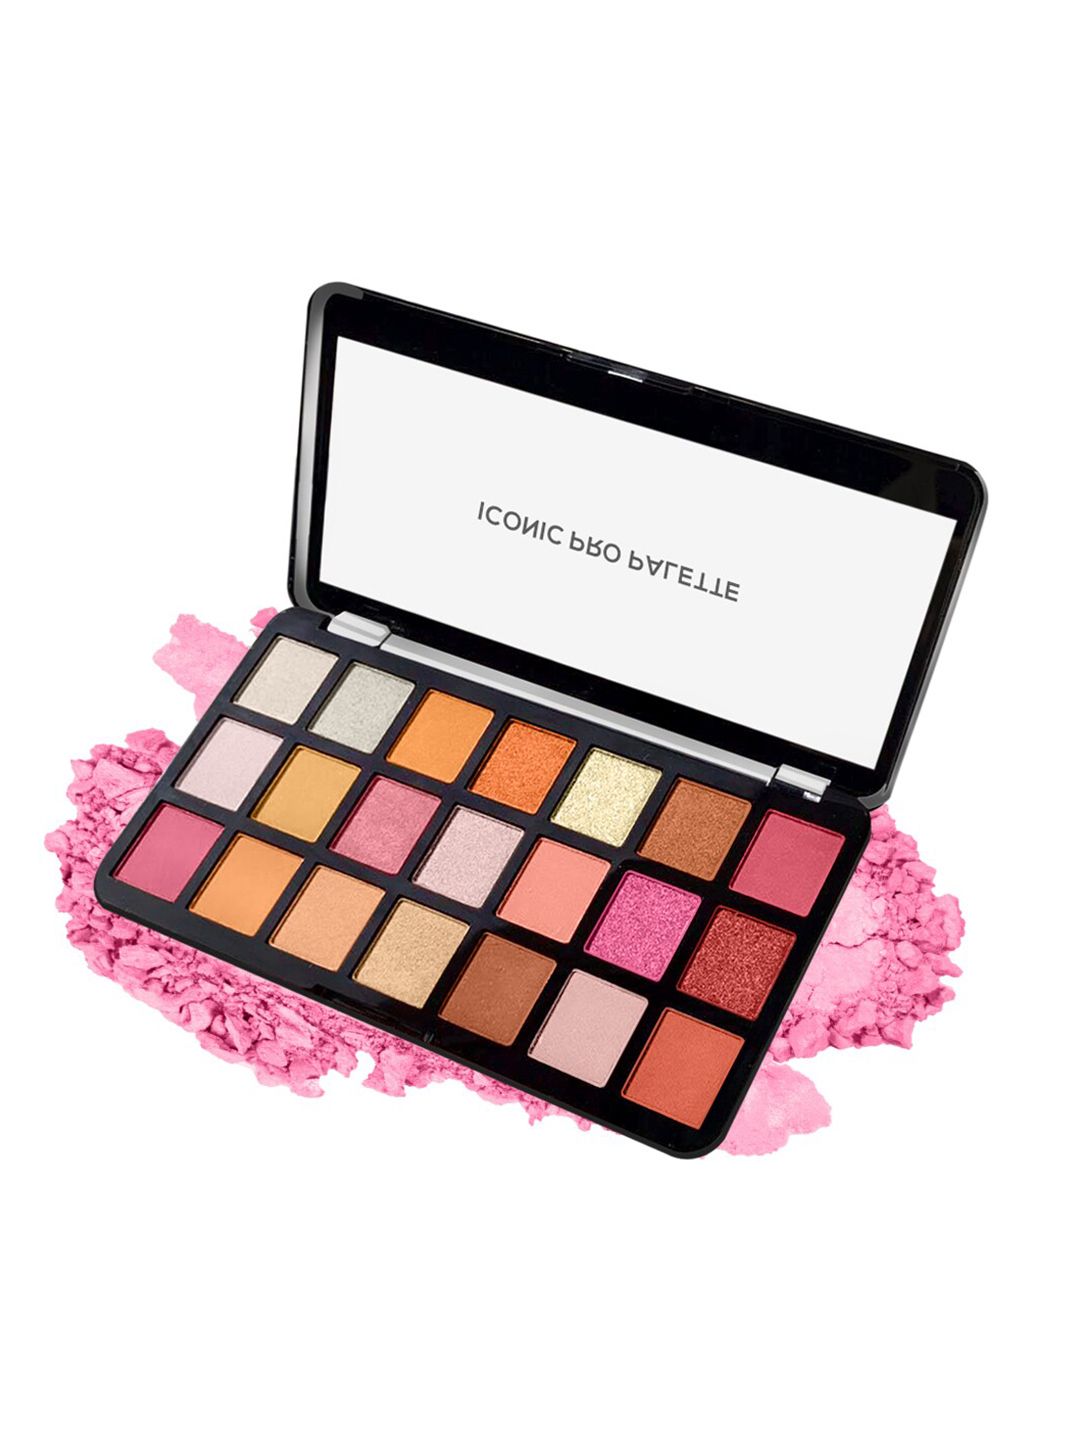 Sivanna Colors Iconic Pro Palette - HF384 02 Price in India